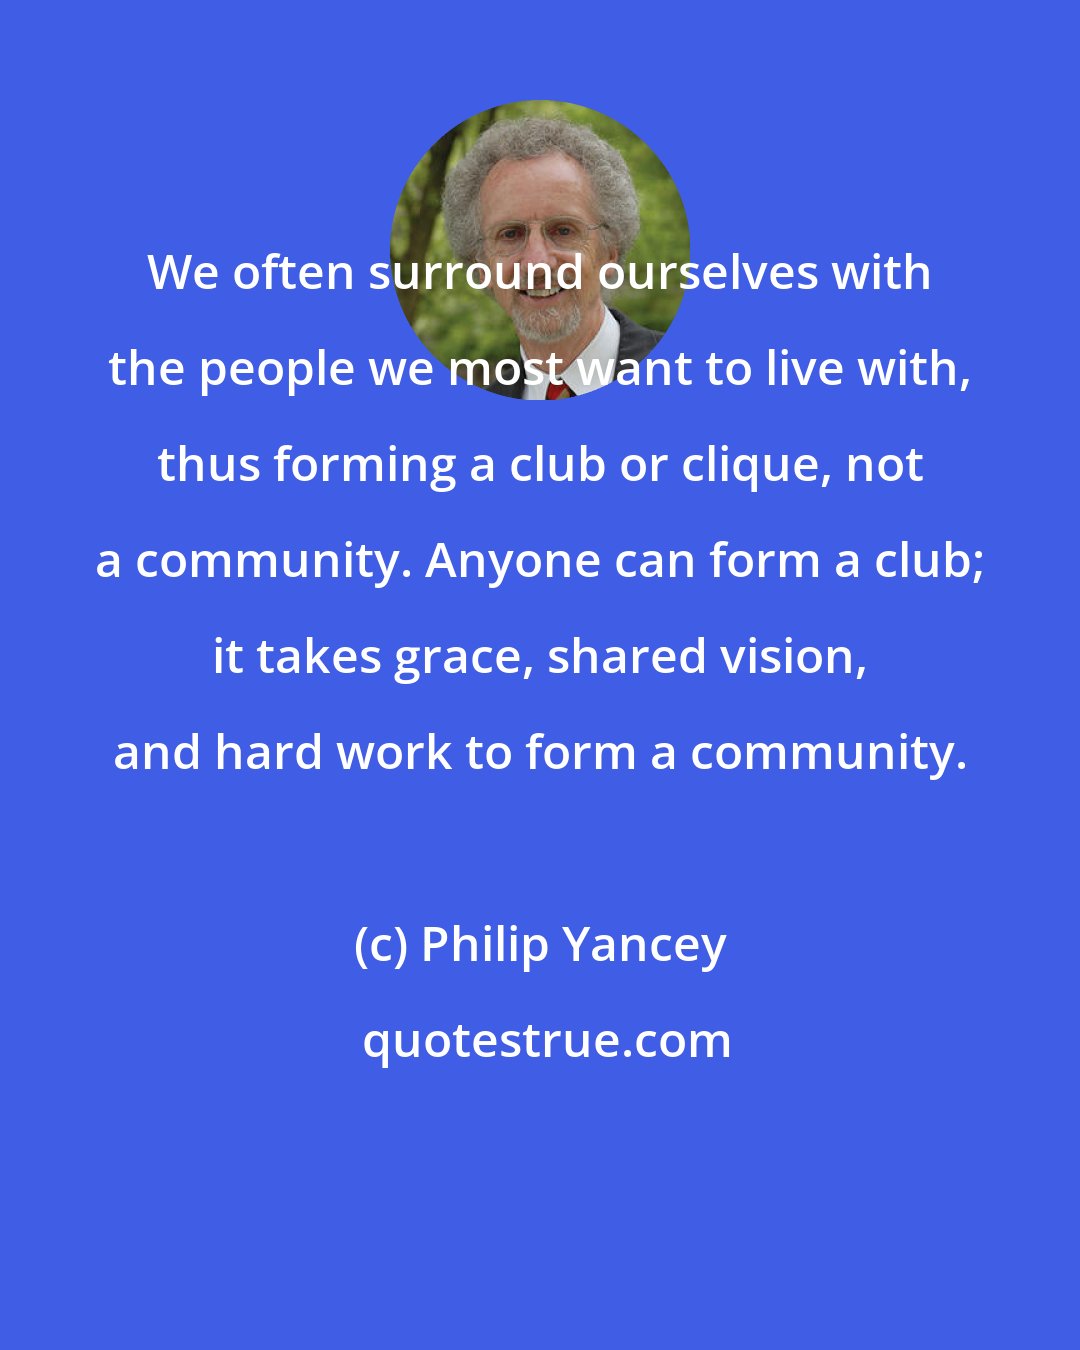 Philip Yancey: We often surround ourselves with the people we most want to live with, thus forming a club or clique, not a community. Anyone can form a club; it takes grace, shared vision, and hard work to form a community.